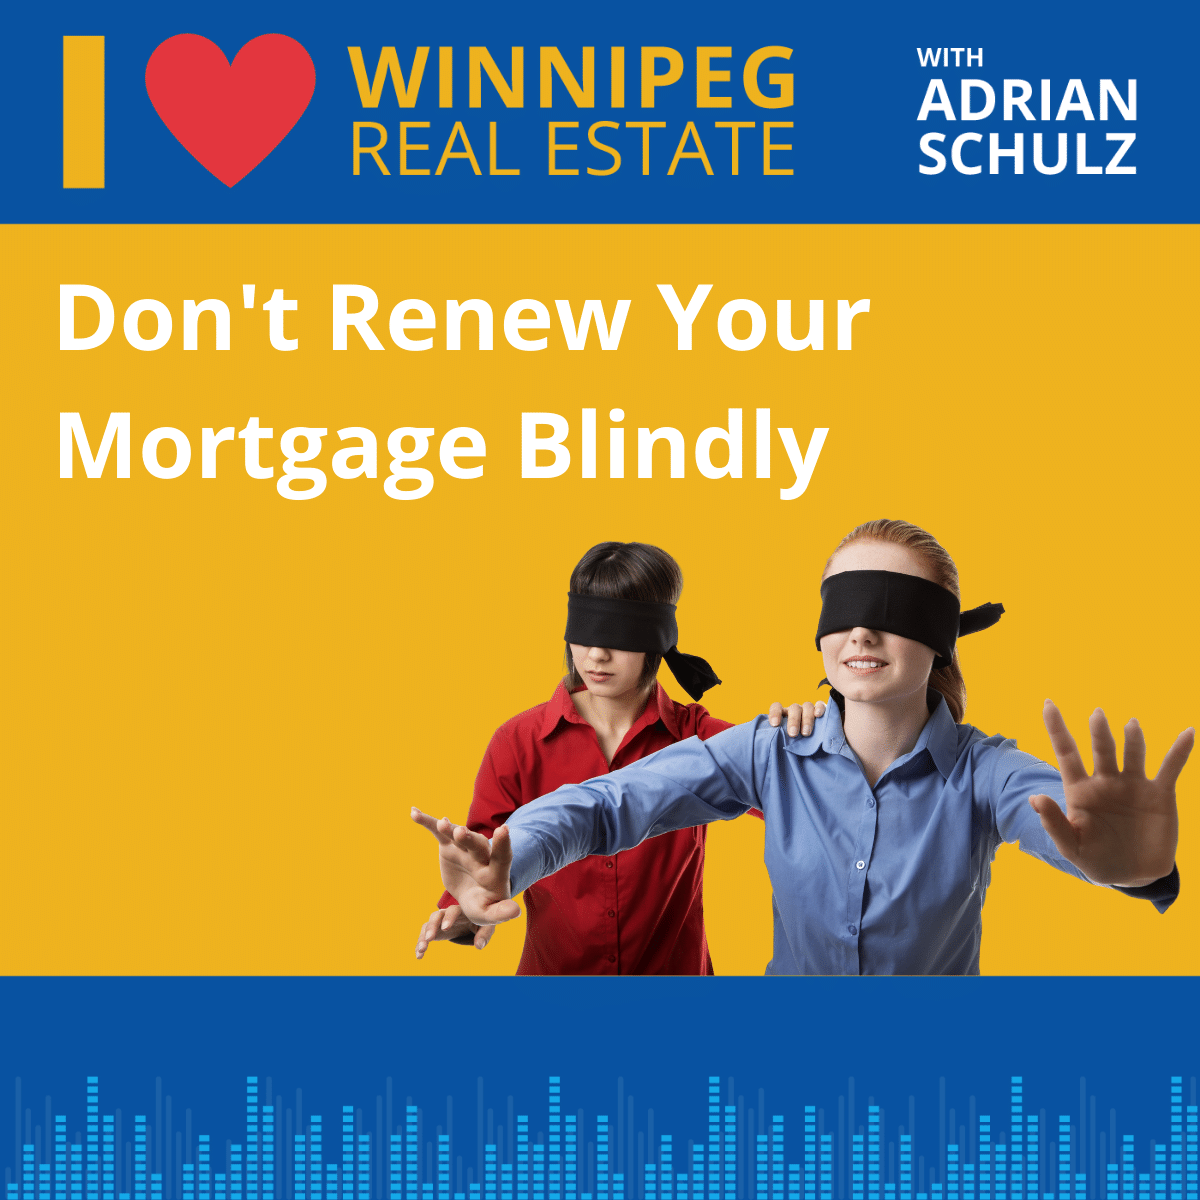 Don’t Renew Your Mortgage Blindly Image